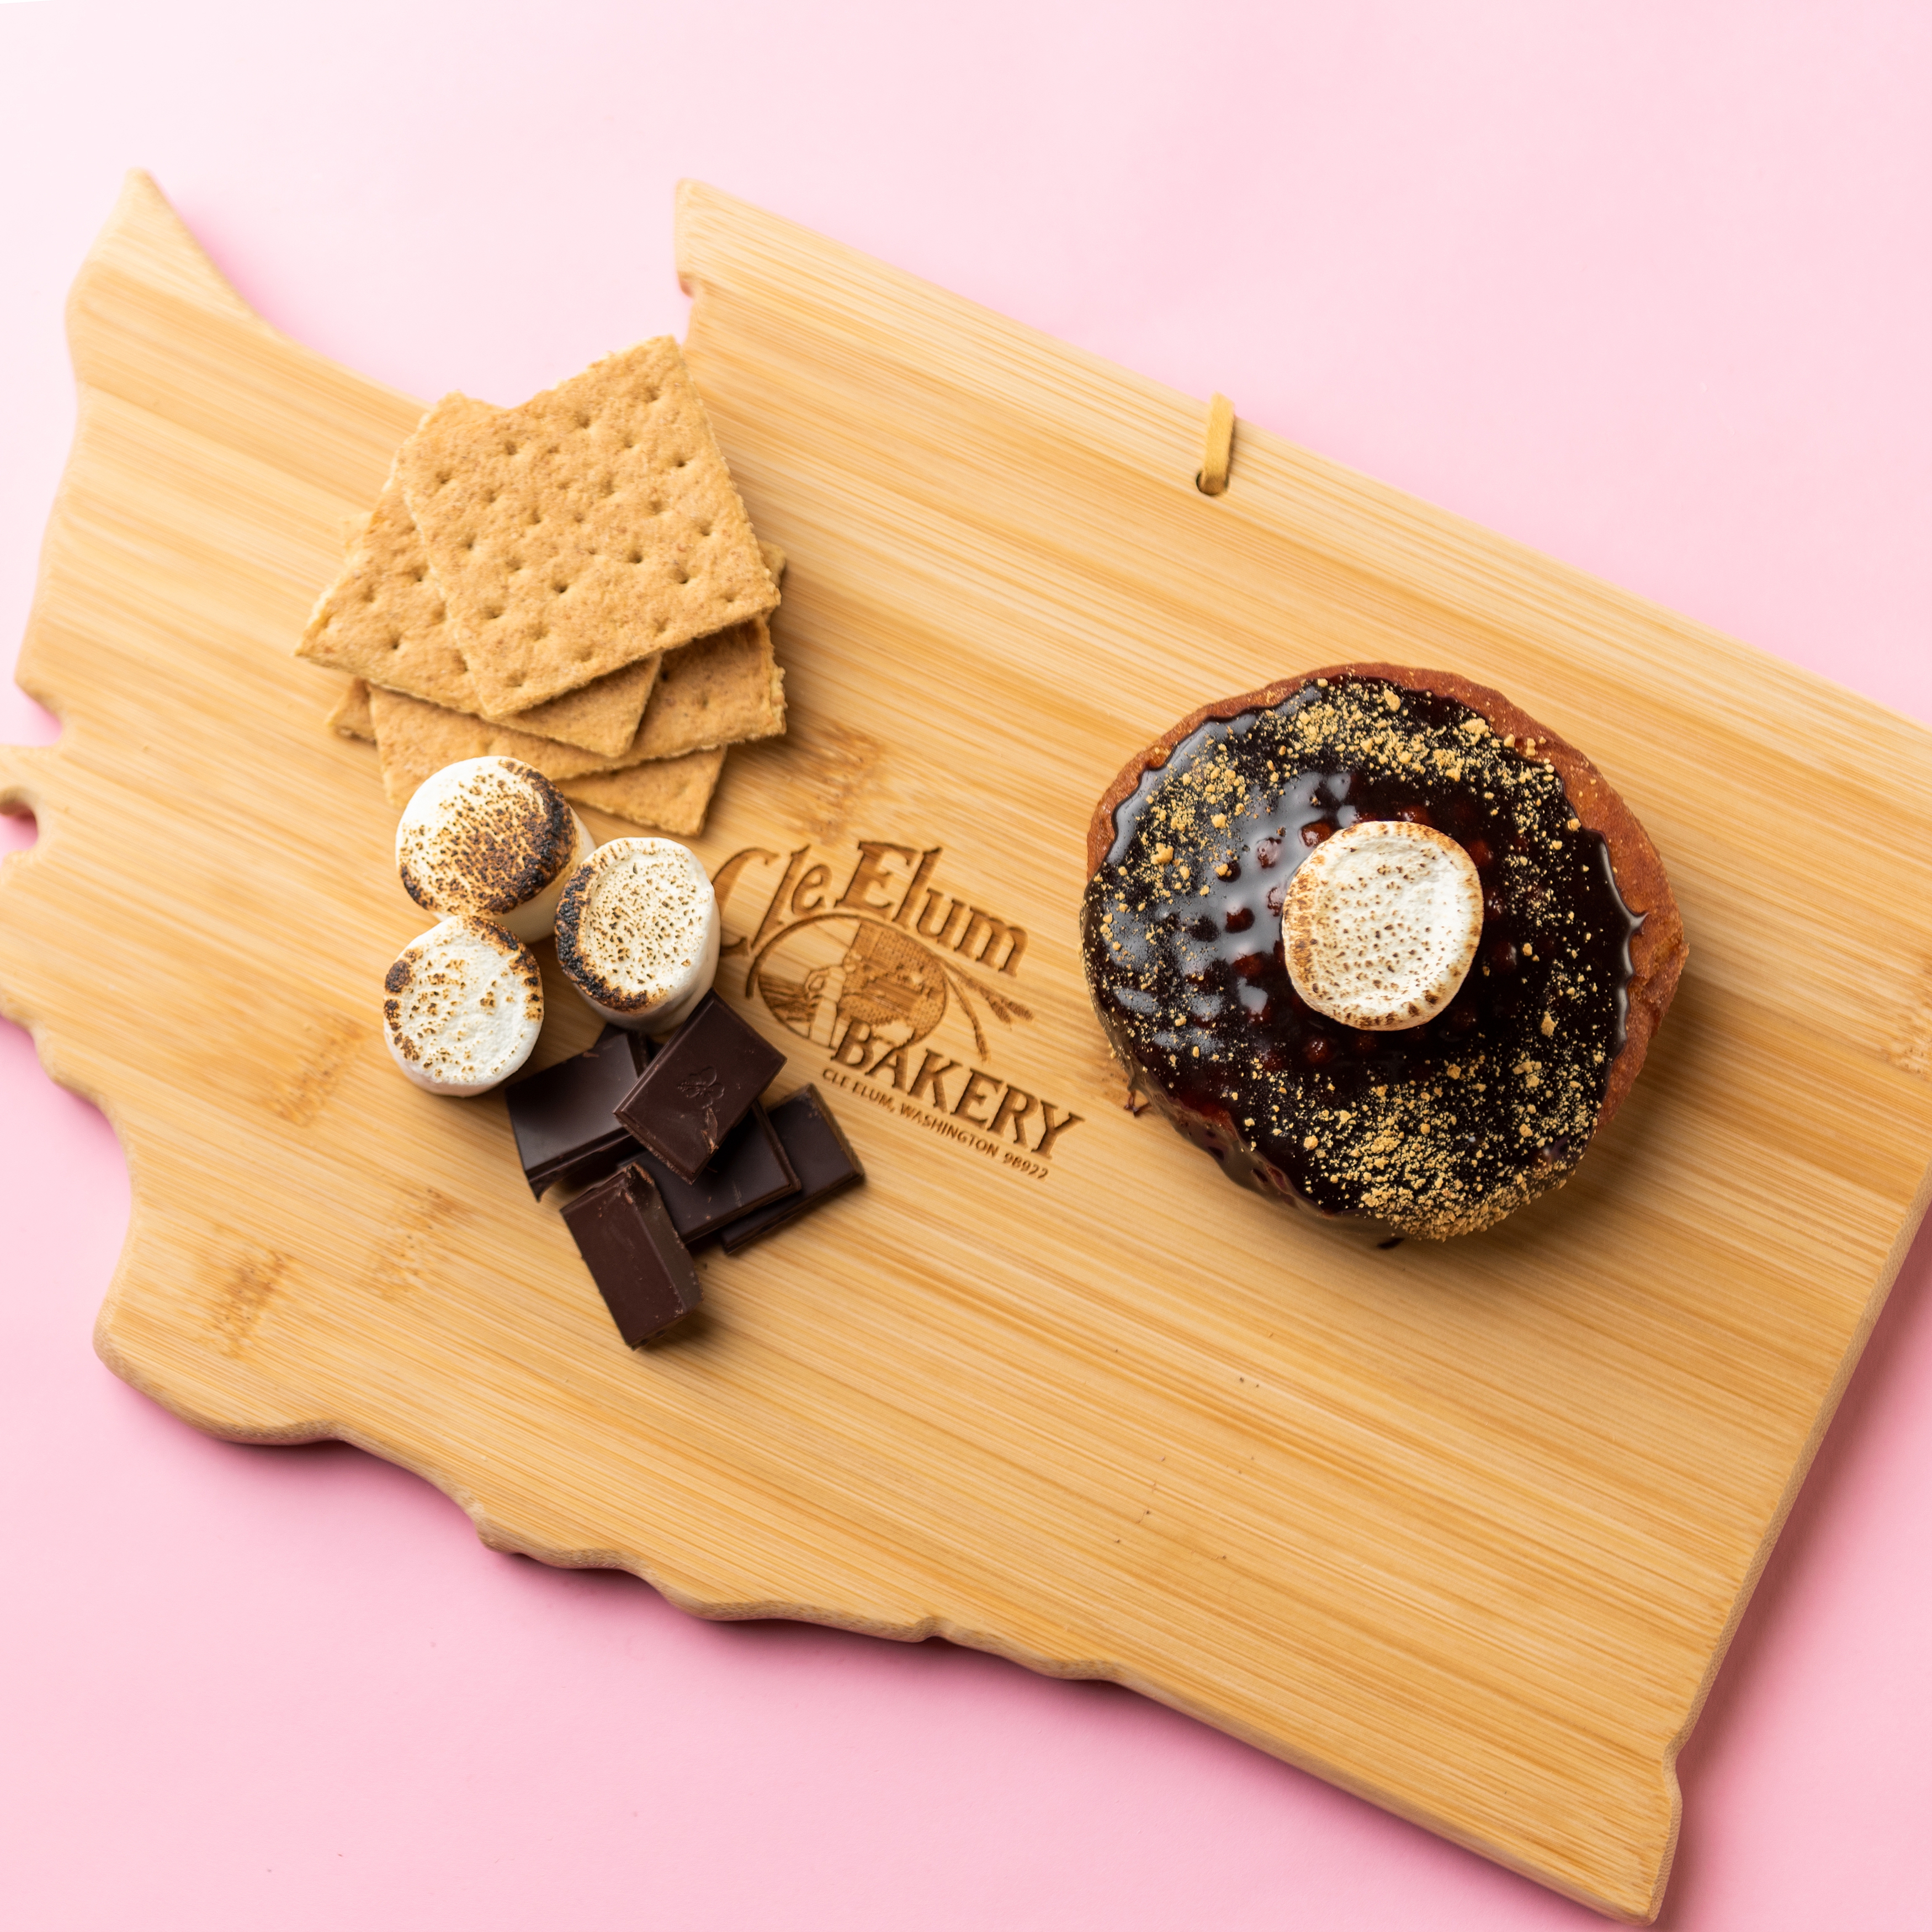 Smores Donuts on a serving board at the Cle Elum Bakery, commercial photography by Mary Maletzke